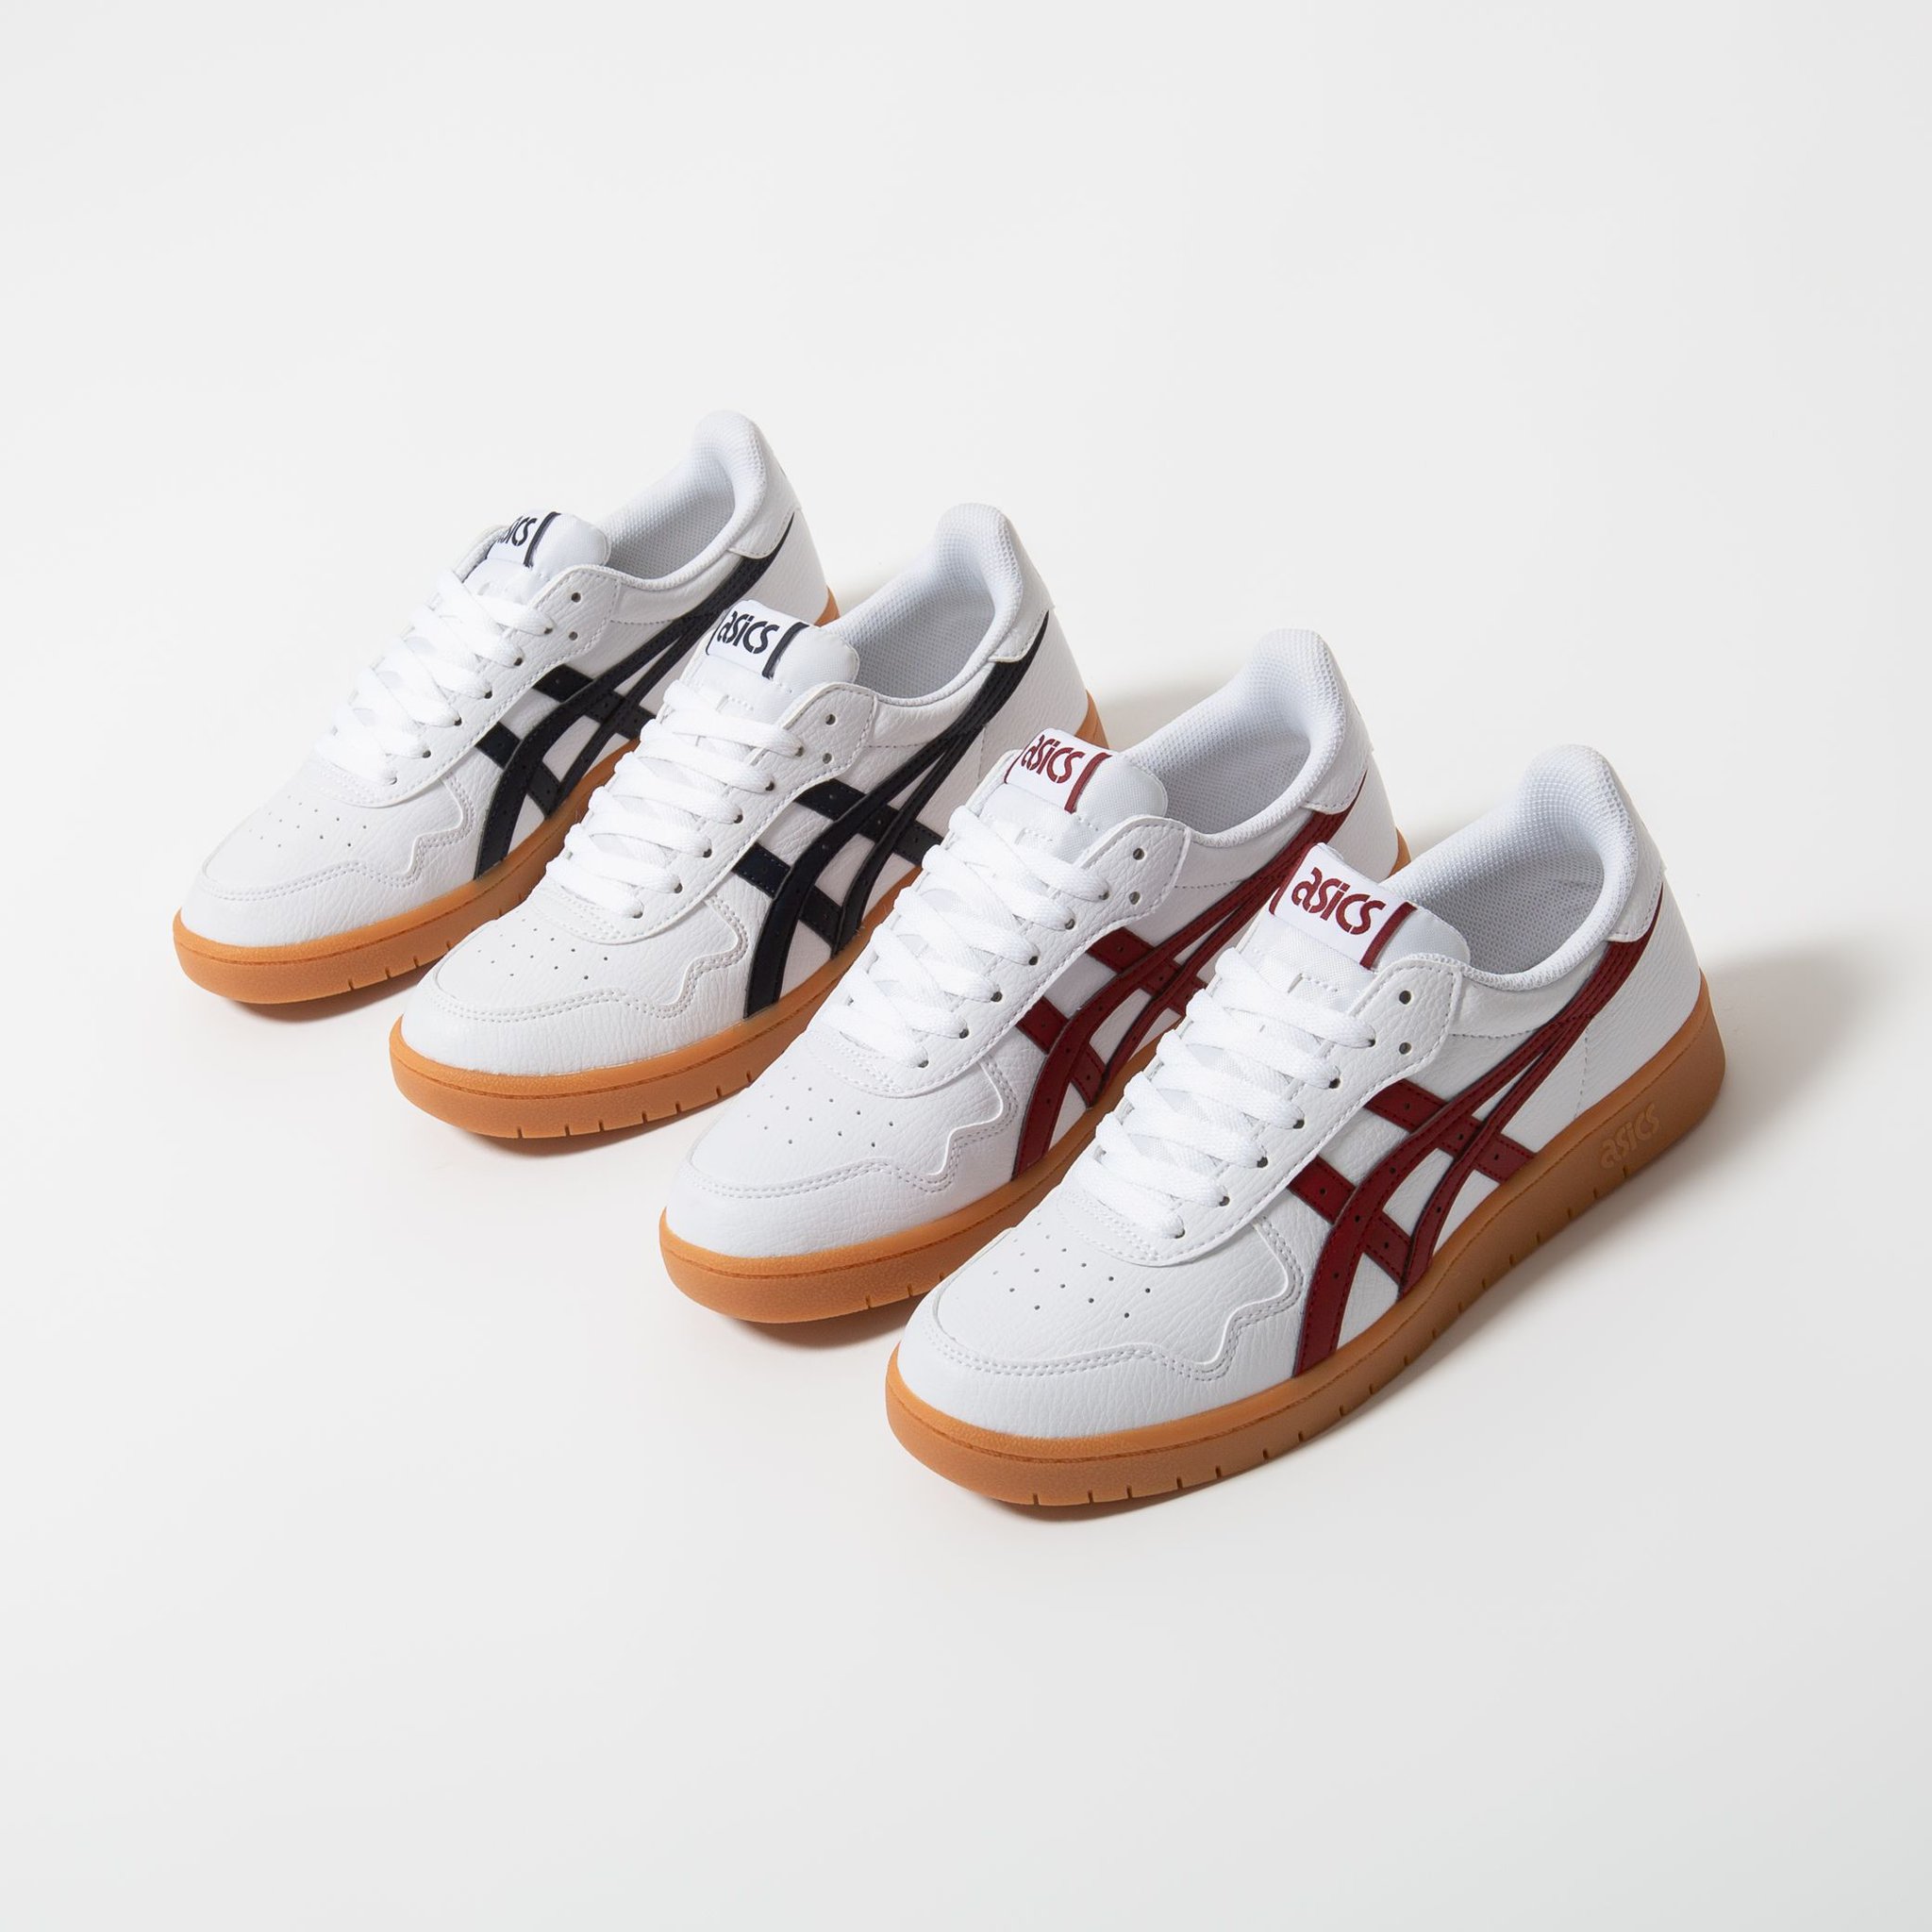 klik Lege med Alternativ Titolo on Twitter: "Asics Japan 🇯🇵 Now available online. shop ➡️  https://t.co/bcUzvfYsbe US 7 (40) - US 11 (45) style code 🔎 1191A163-105  and 1191A163-106 #titoloSHOP #titolo #asics #asicsJAPAN #japan  https://t.co/likoVUNV7j" / Twitter